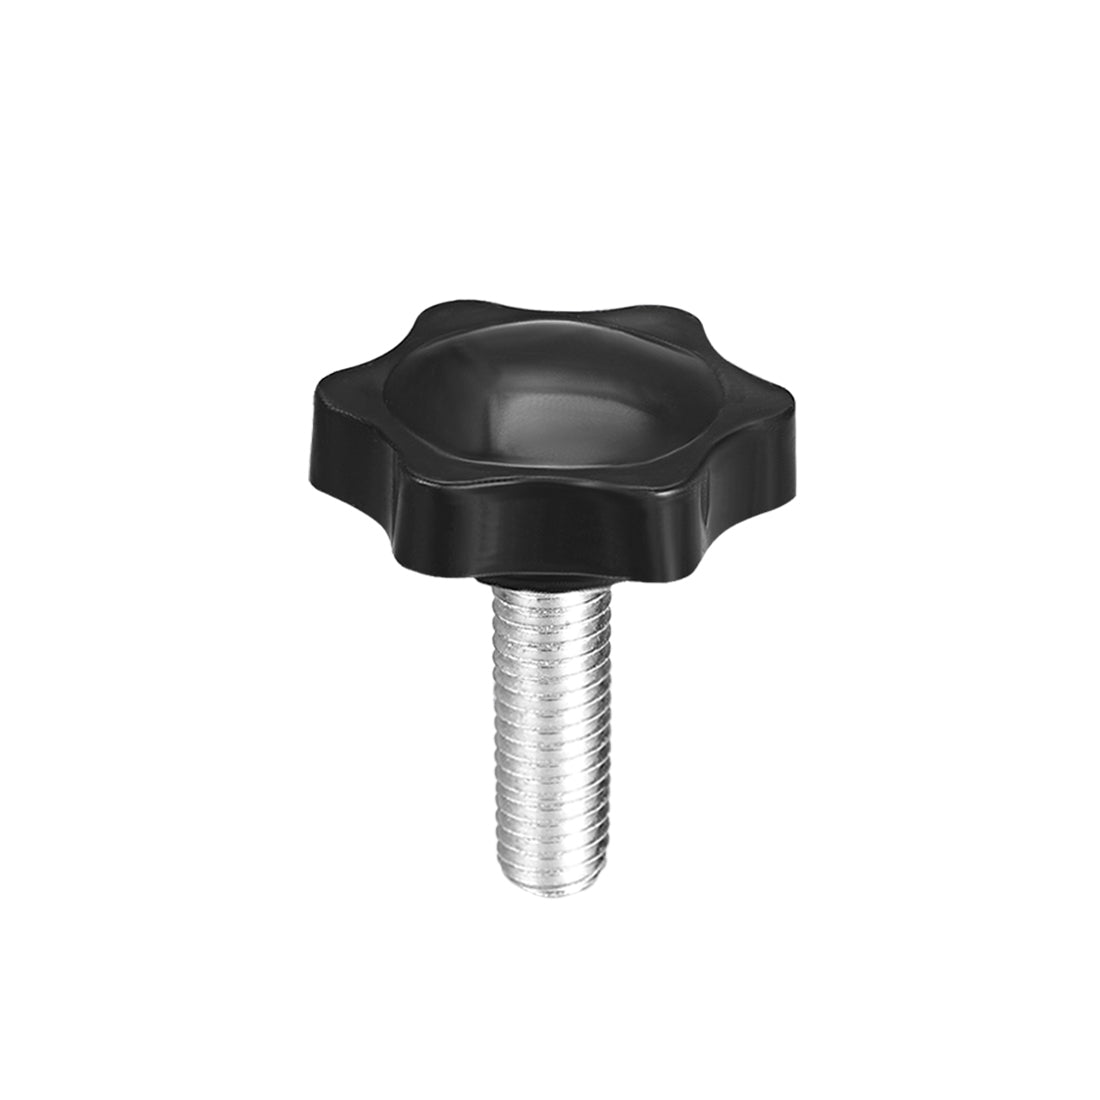 uxcell Uxcell Clamping Screw Knob, Plum Hex Shaped Grips Star Knob Male Thread